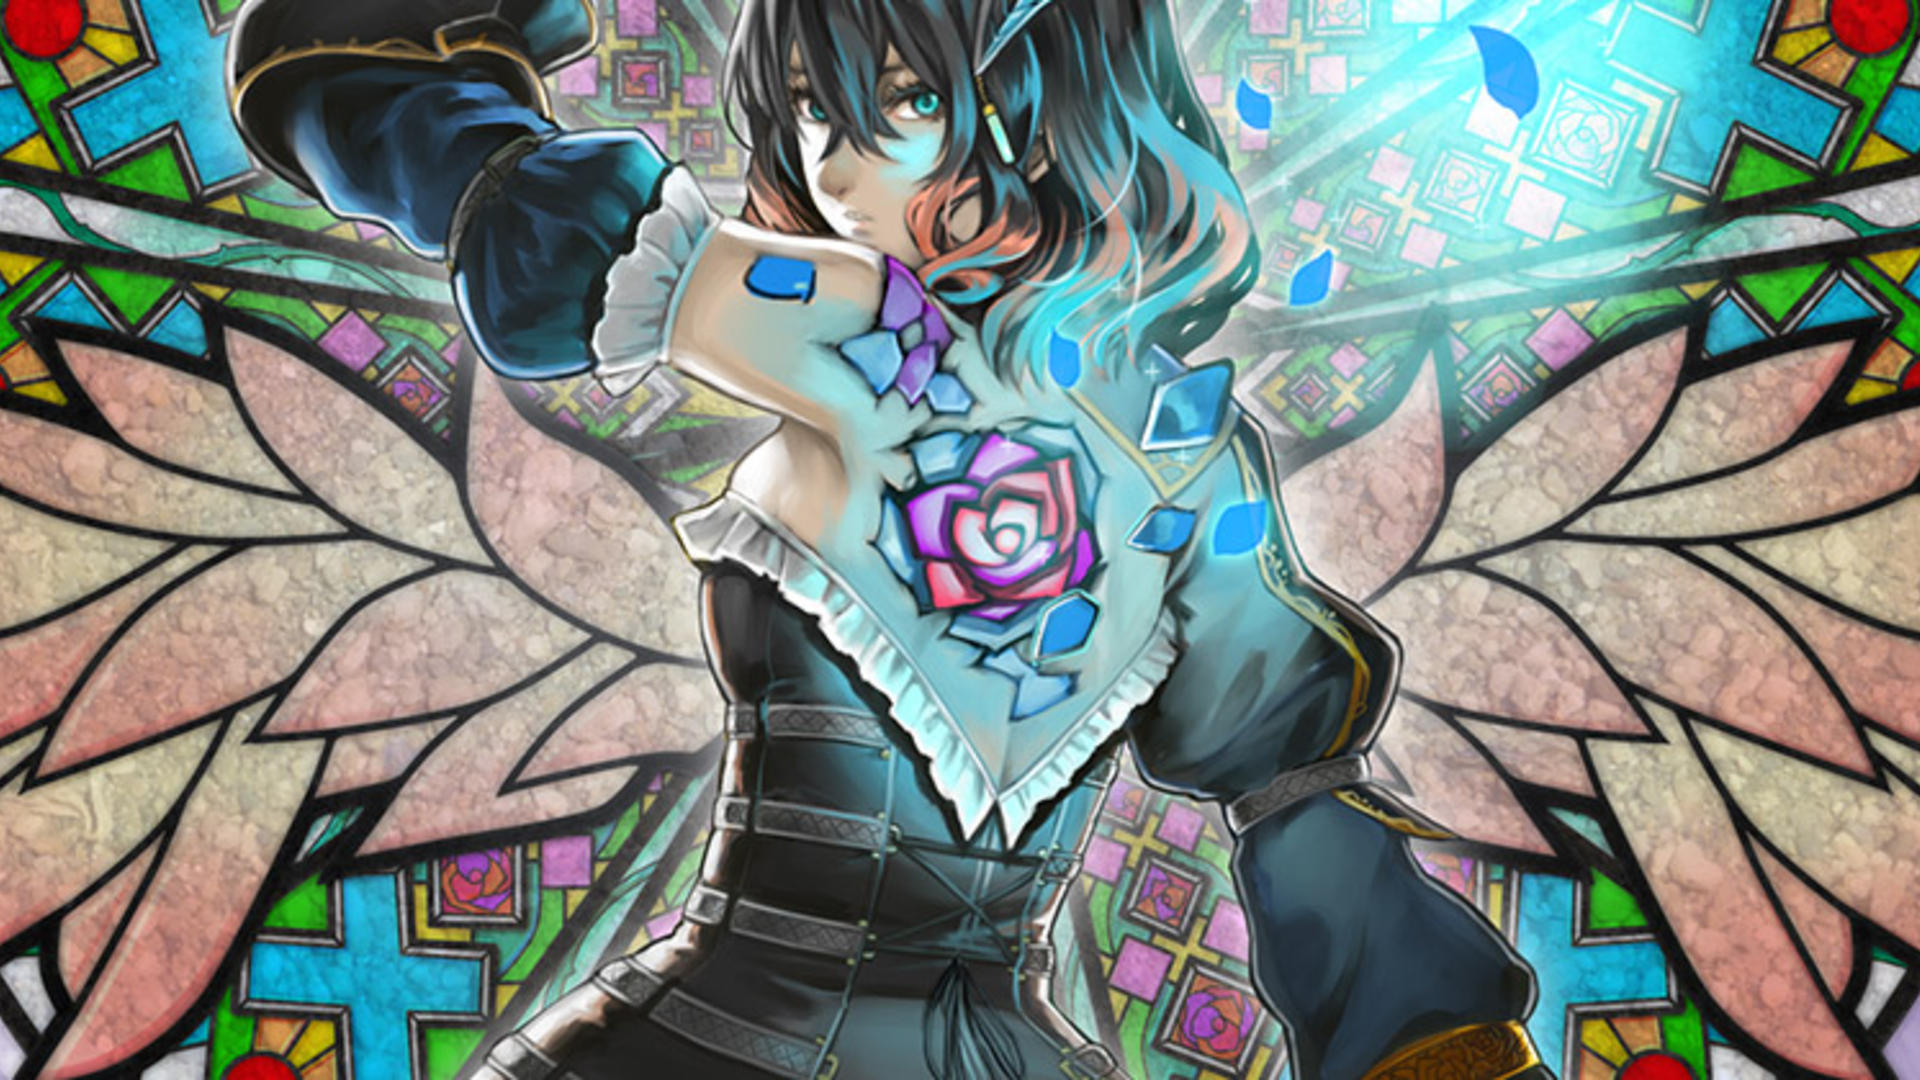 bloodstained being published by 505 games